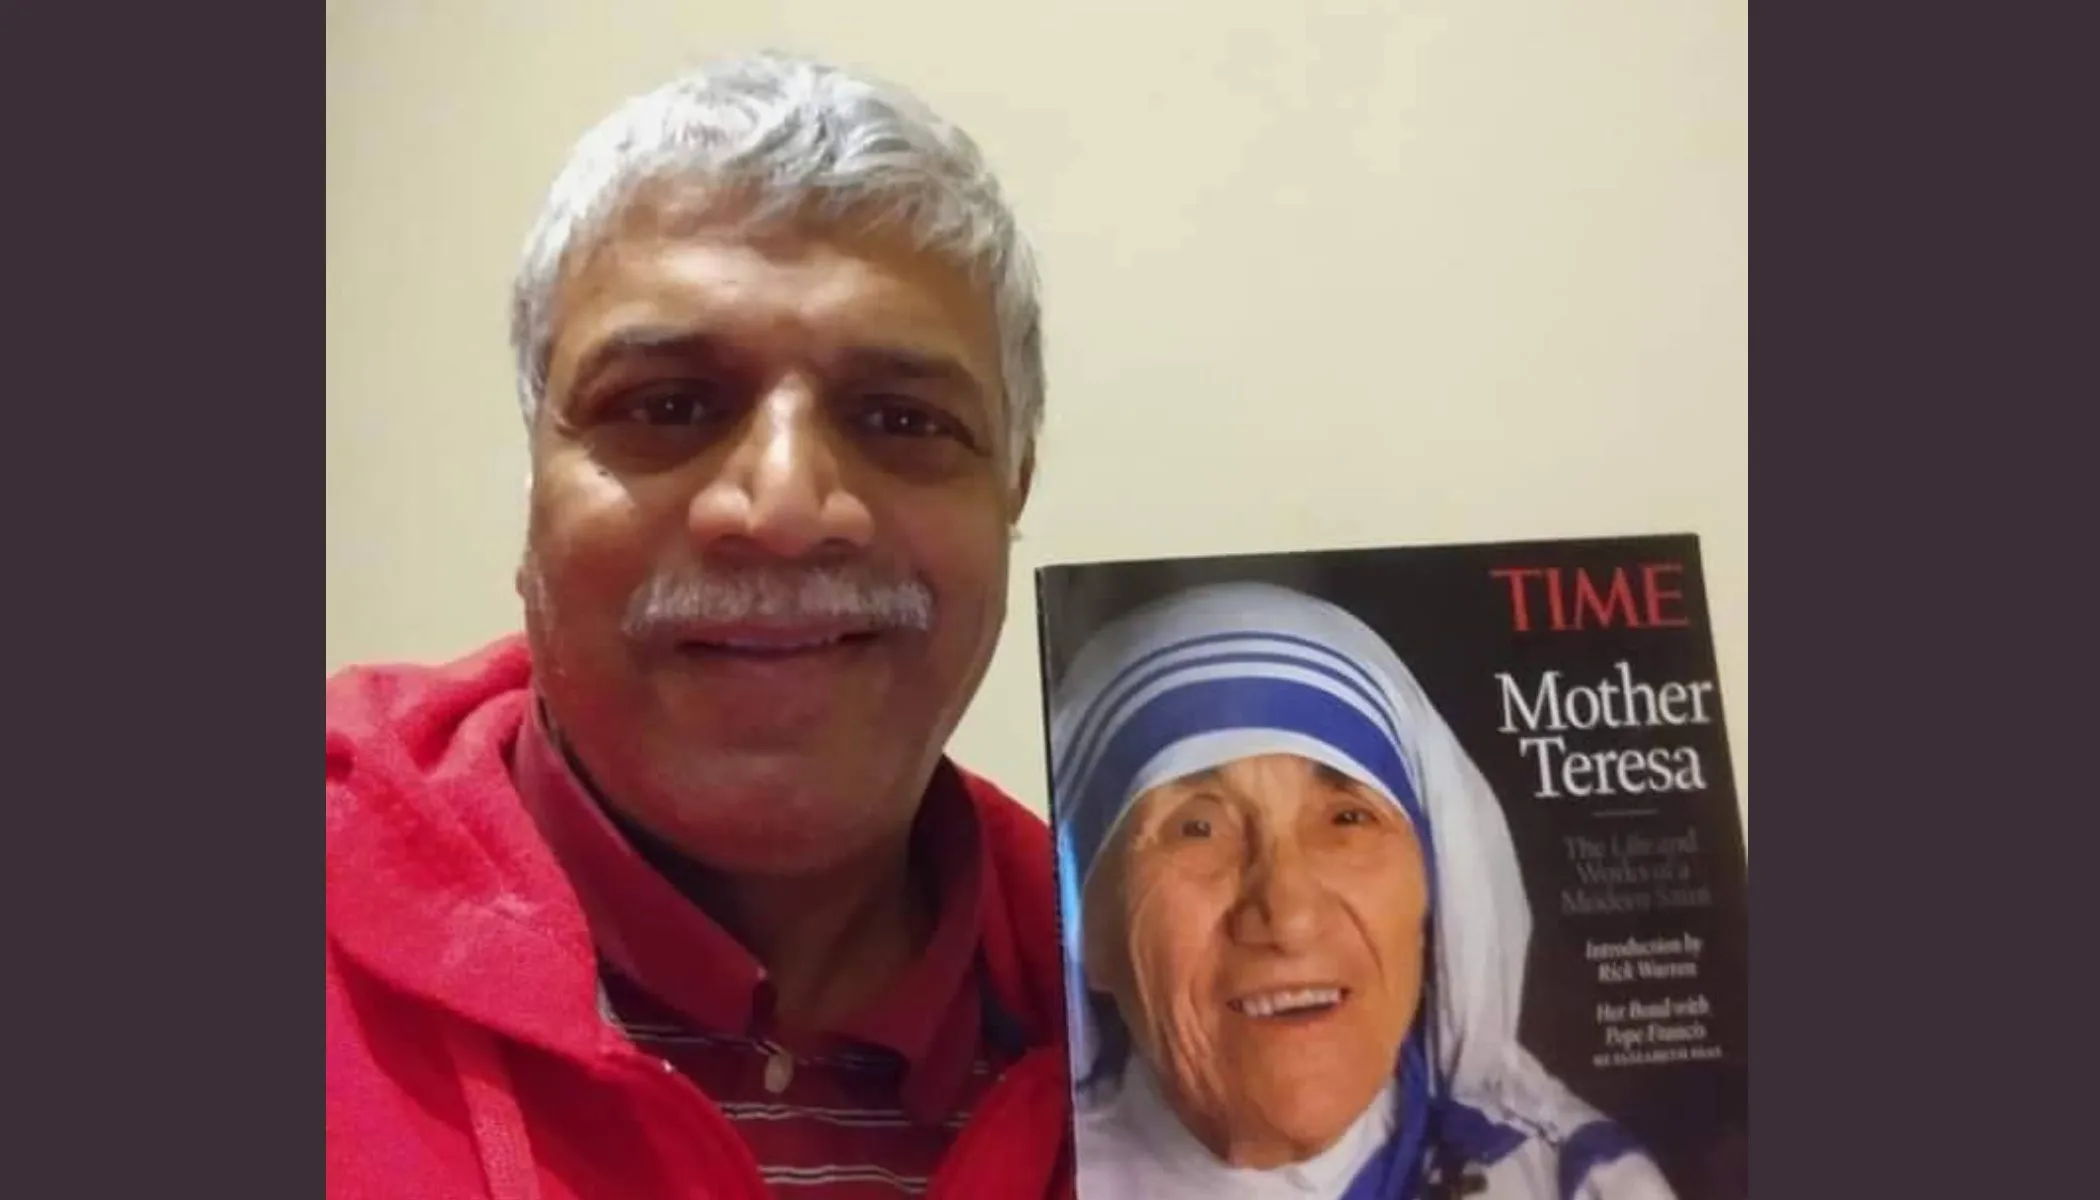 Patrick Norton pictured with a magazine cover of Mother Teresa, who picked him up from the streets of Bombay as an infant. Later he was adopted by an American family.?w=200&h=150